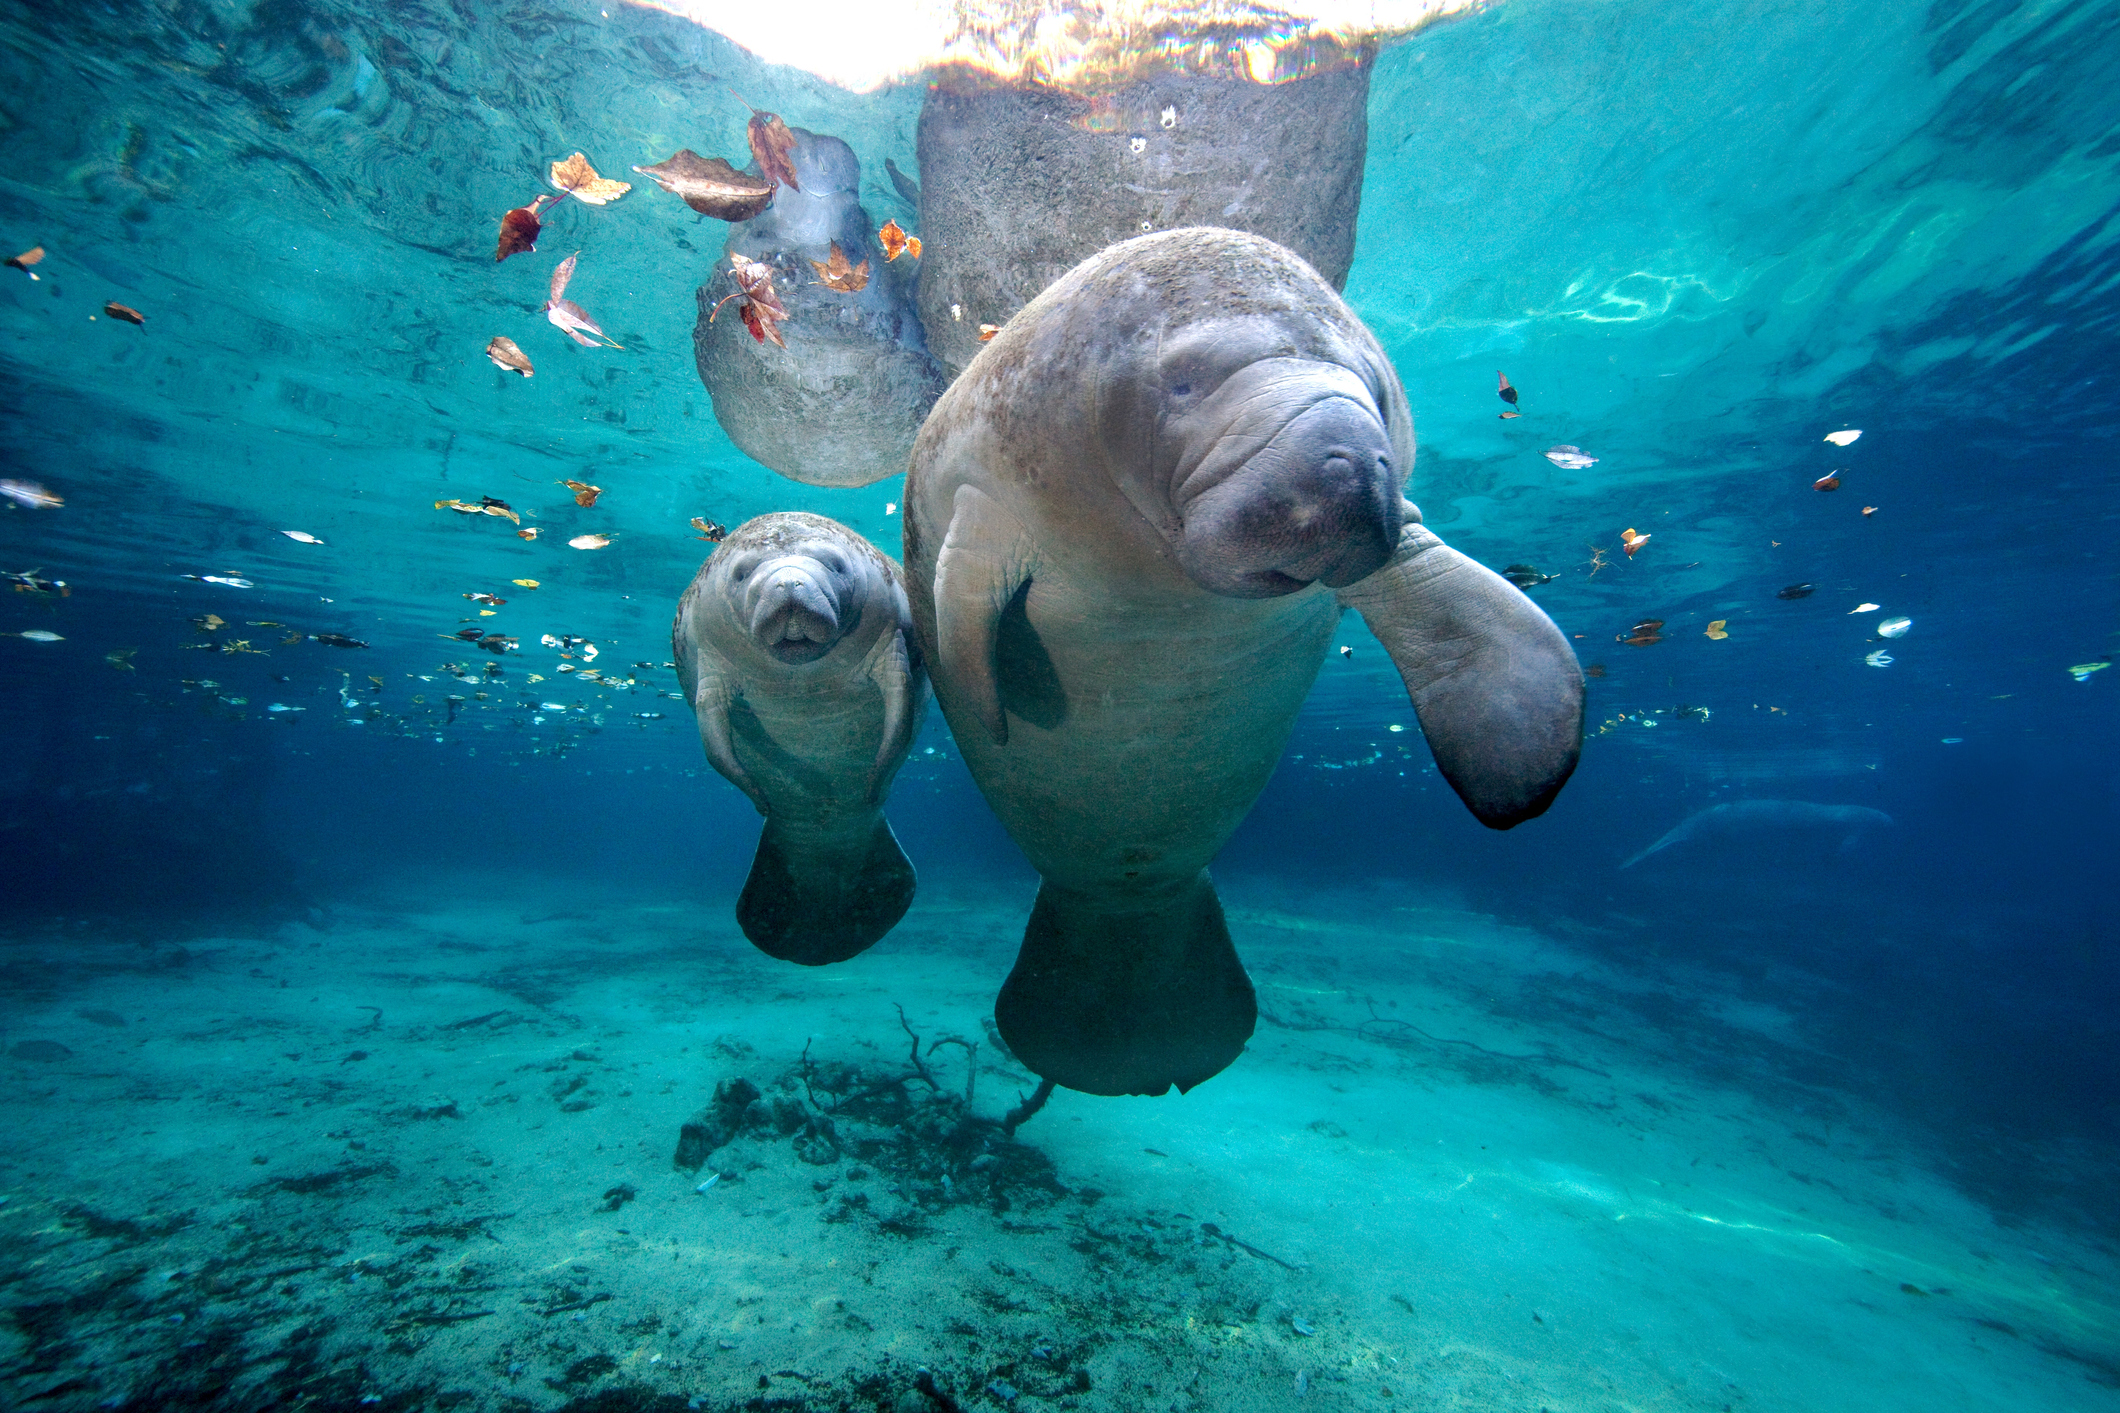 Going Boating This Weekend? Don’t Forget To Watch Out For Manatees